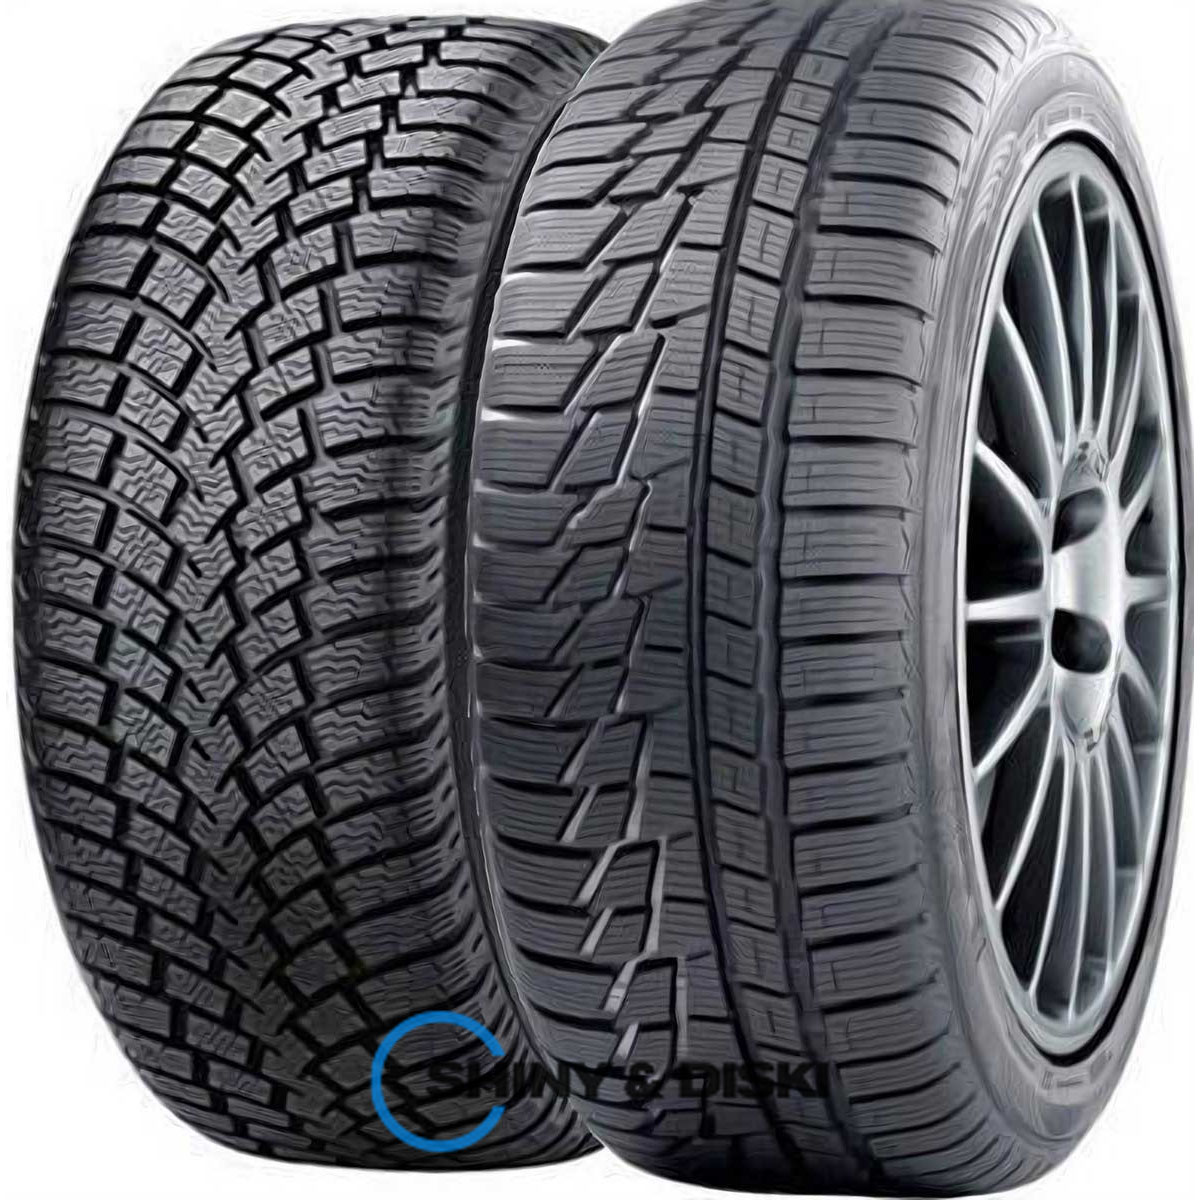 nokian all weather + 205/55 r16 91h